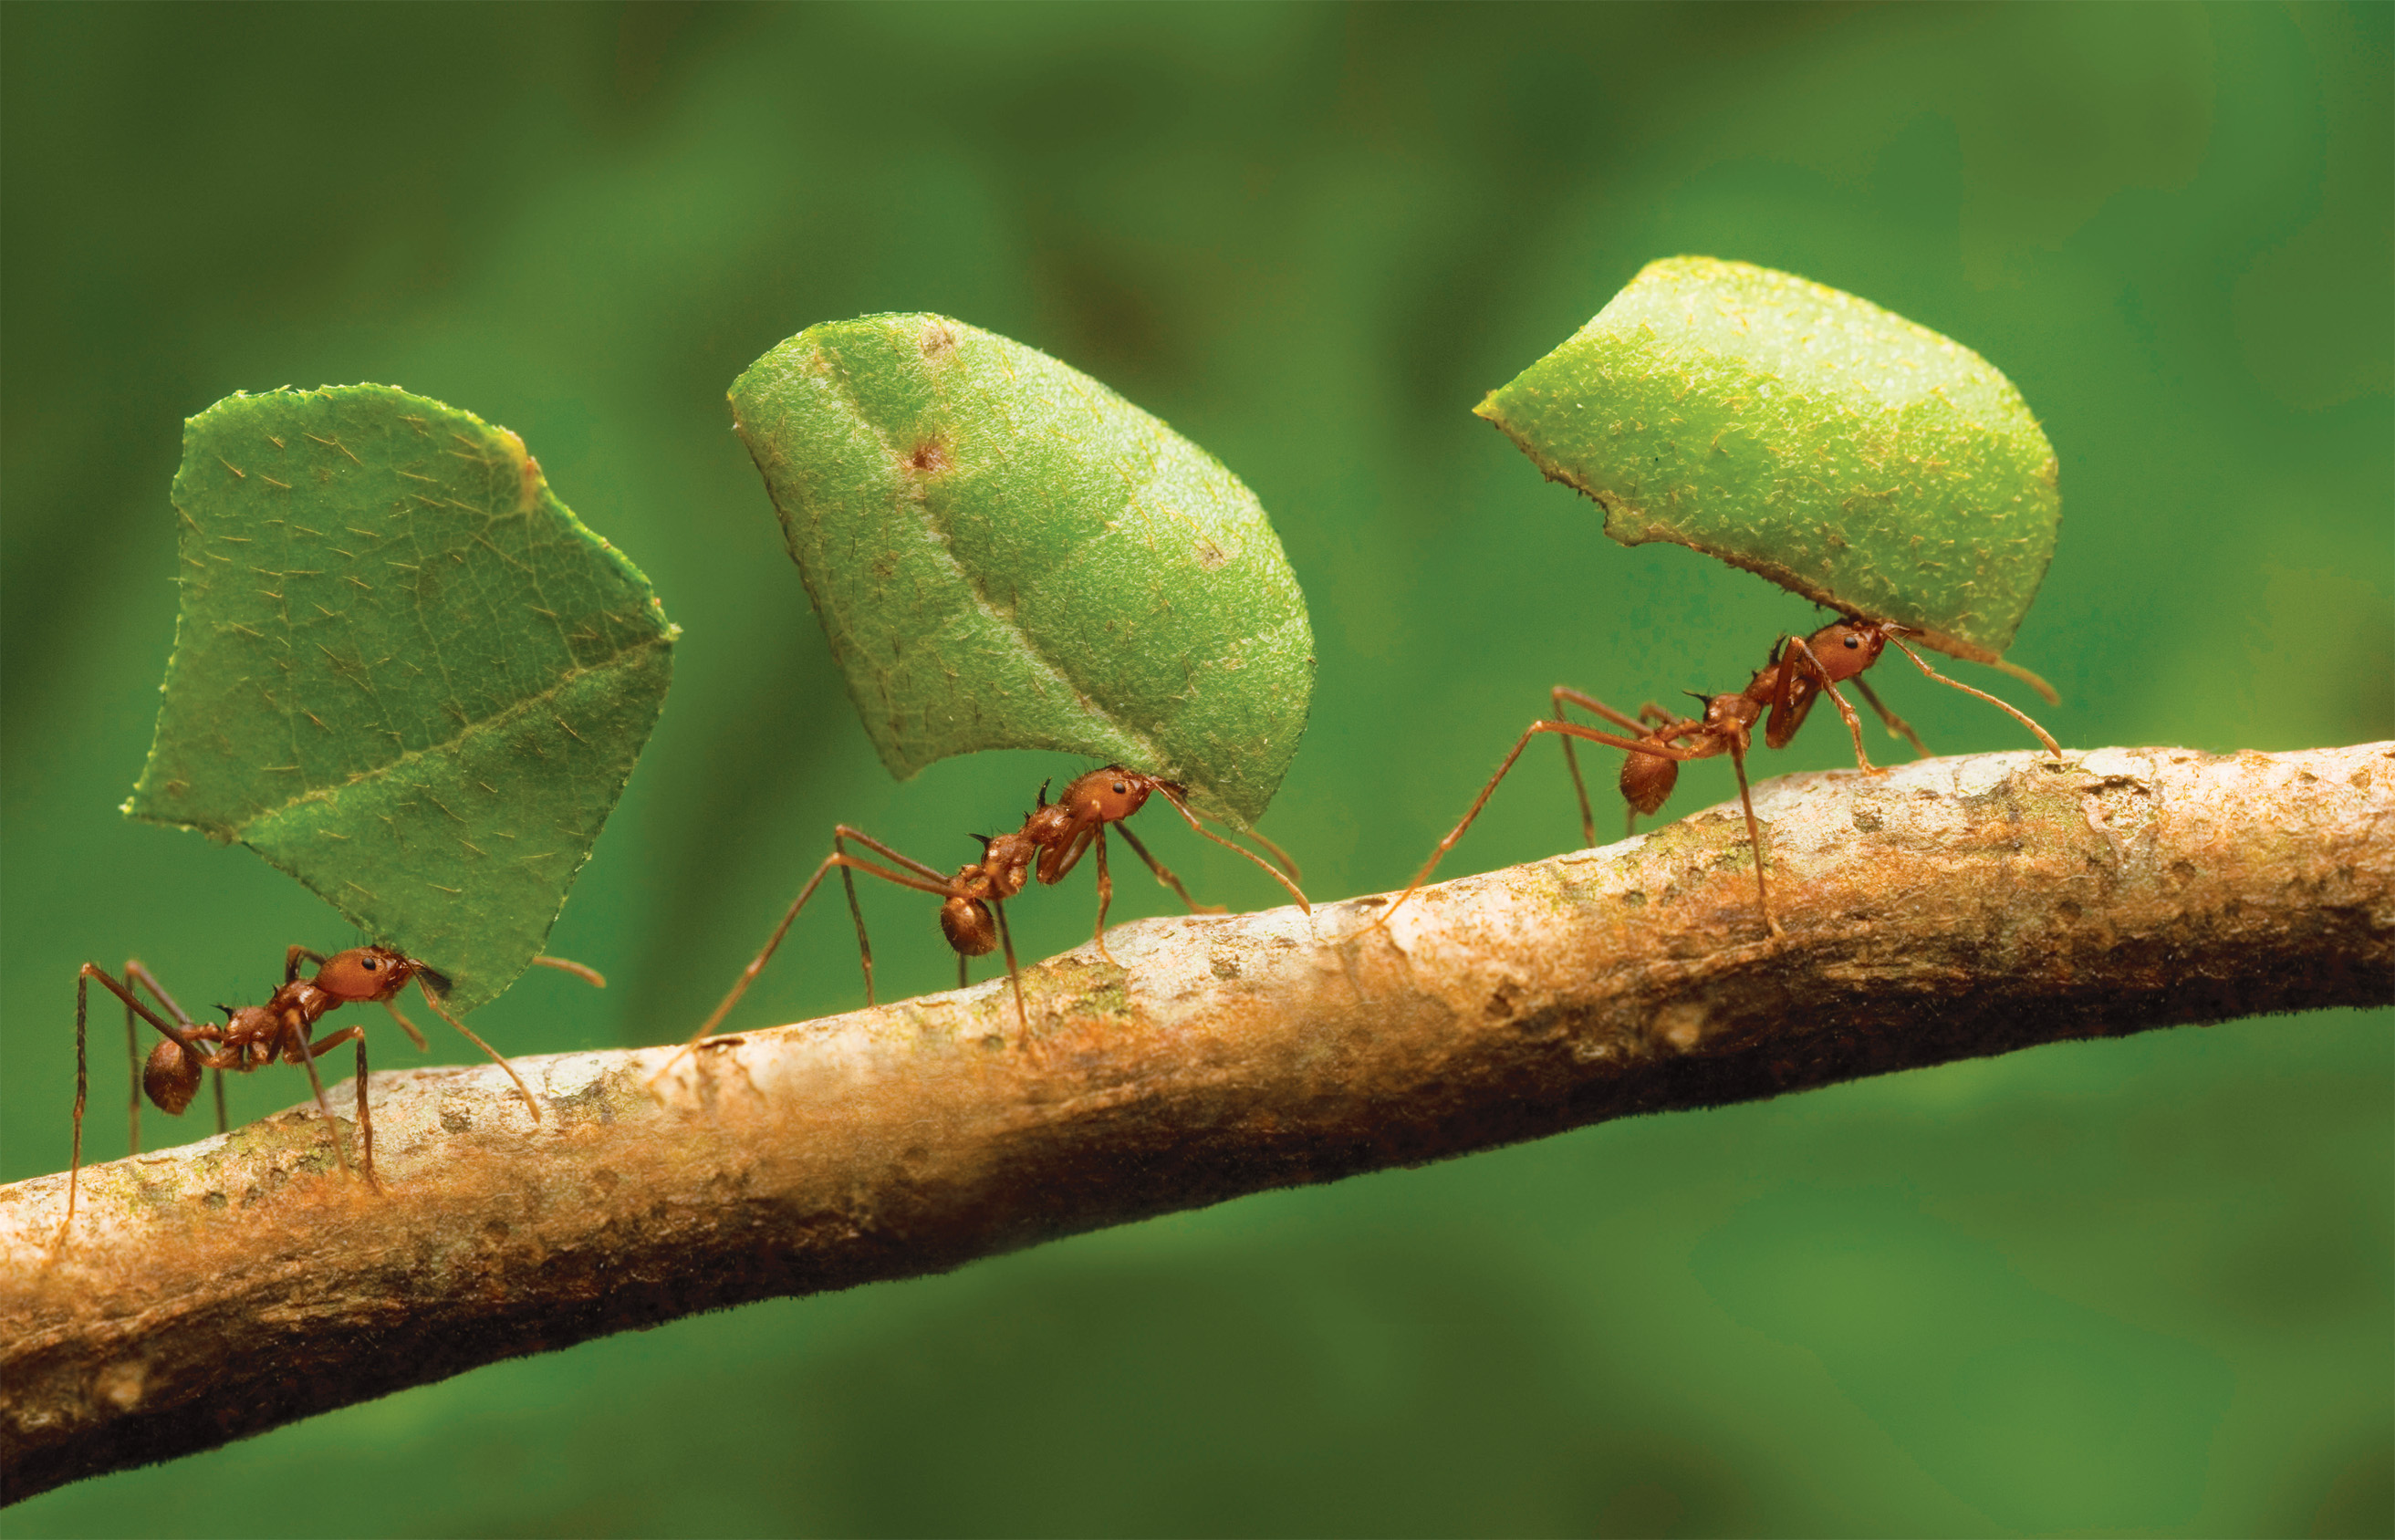 Ant architects: How do ants construct their nests? | How It Works ...